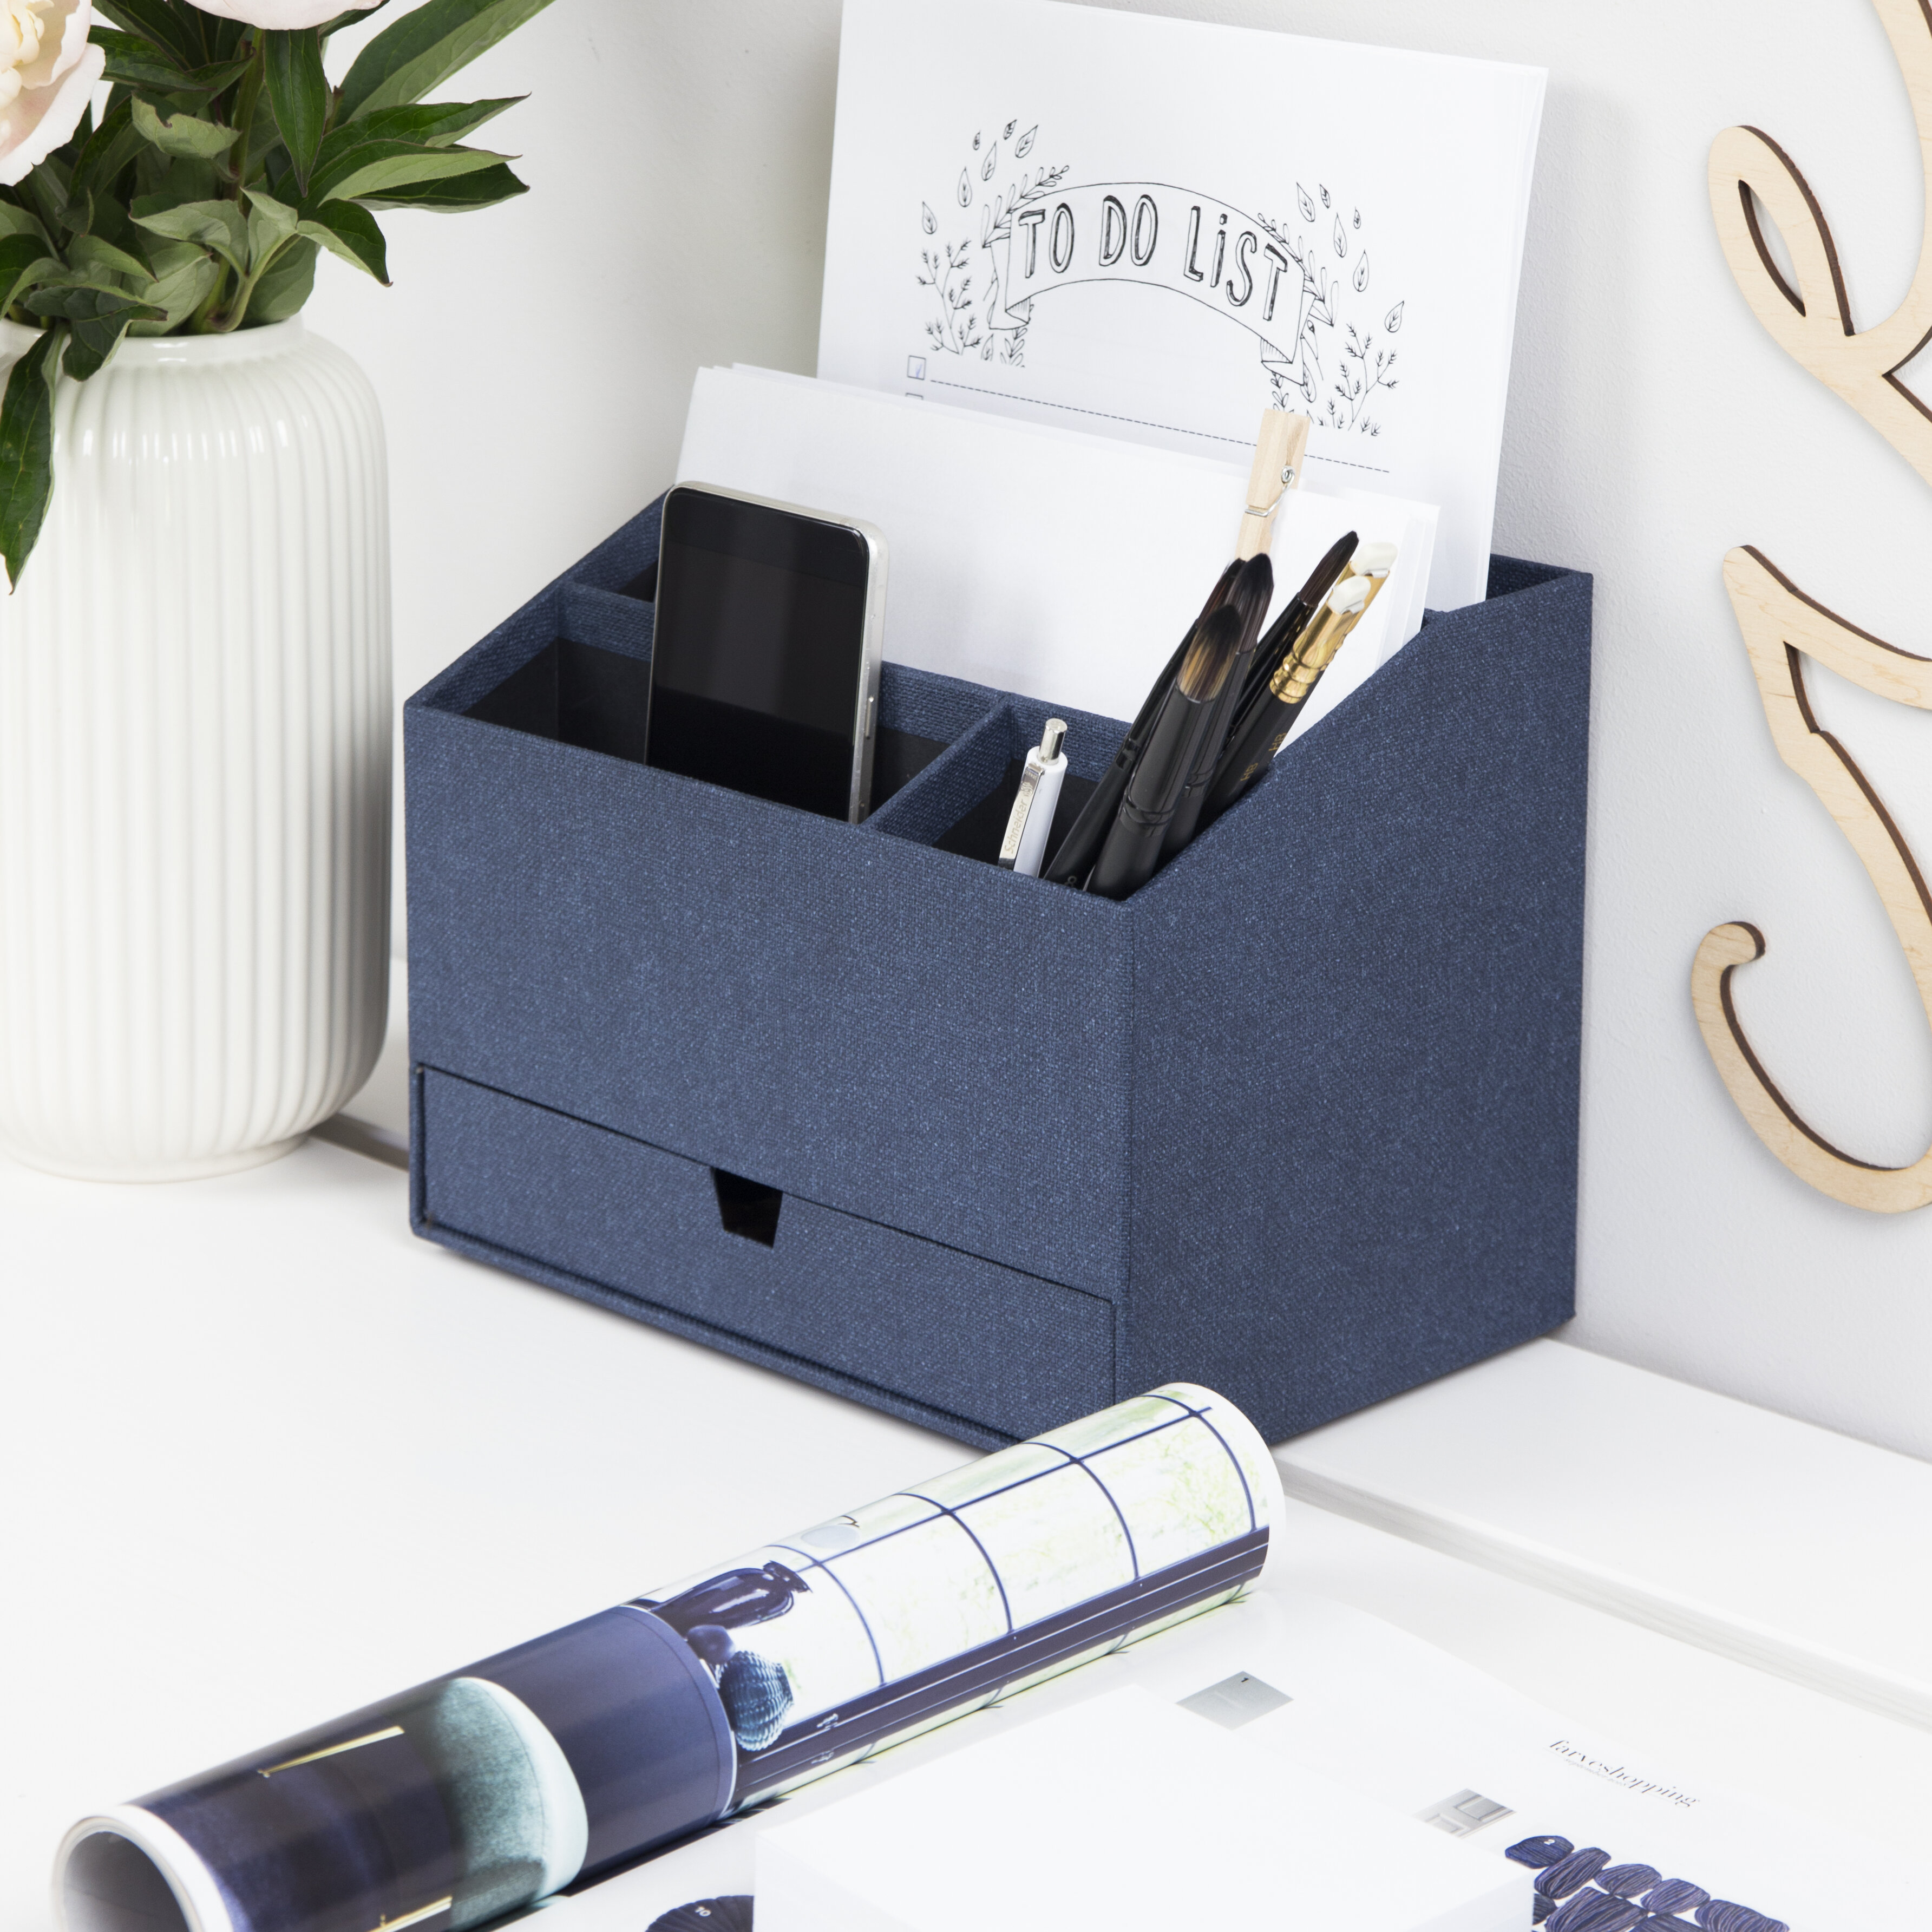 Blue Office Supplies Desk Organizer Holds Everything You Need Desktop Organizer/Office Organizer Perfect Size for Your Desk Mesh Desk Organizer Keeps All Your Office Supplies in one Place 